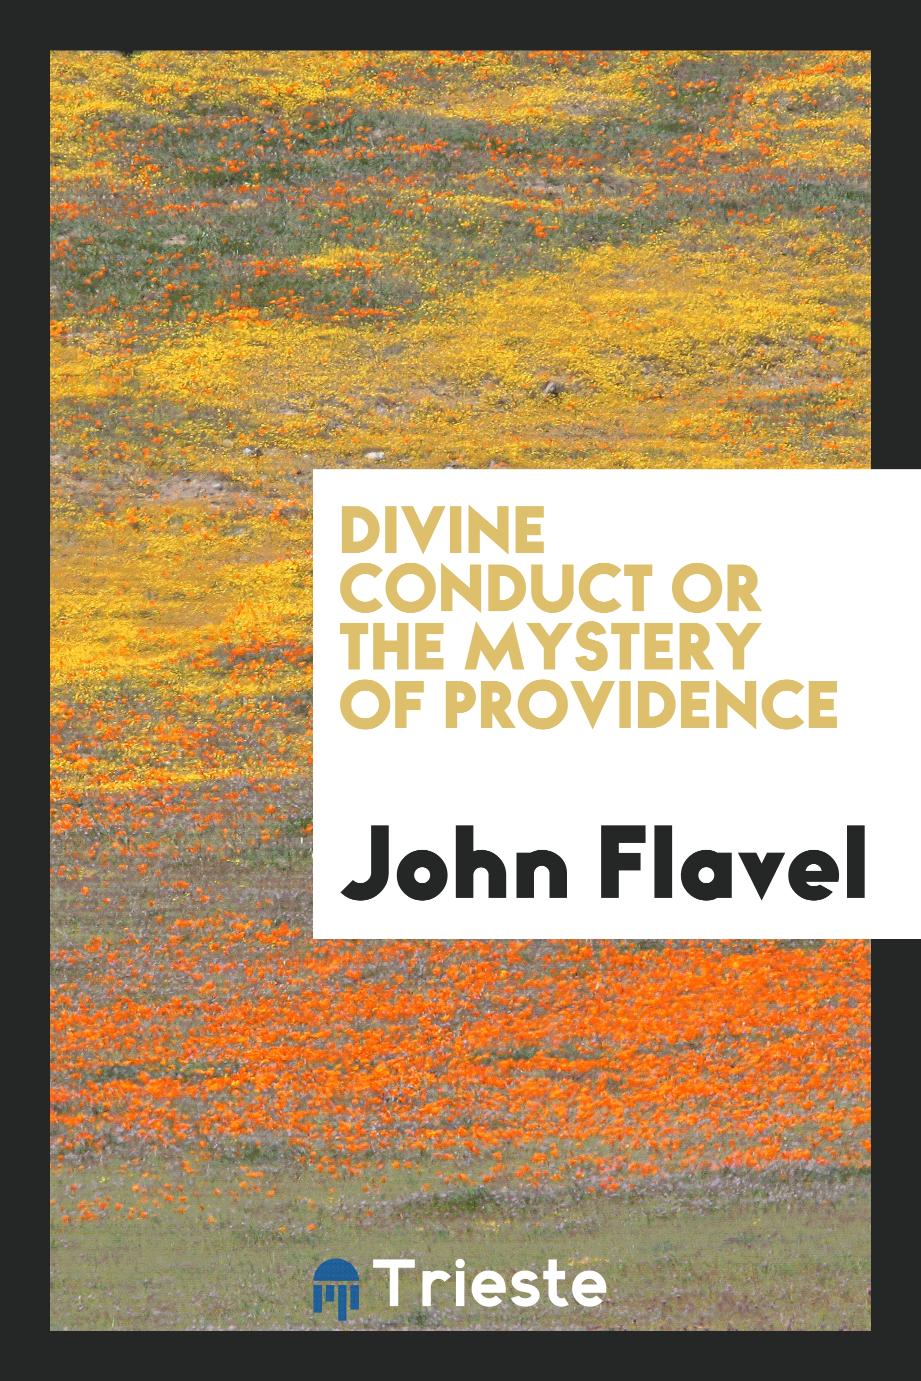 Divine conduct or The mystery of Providence